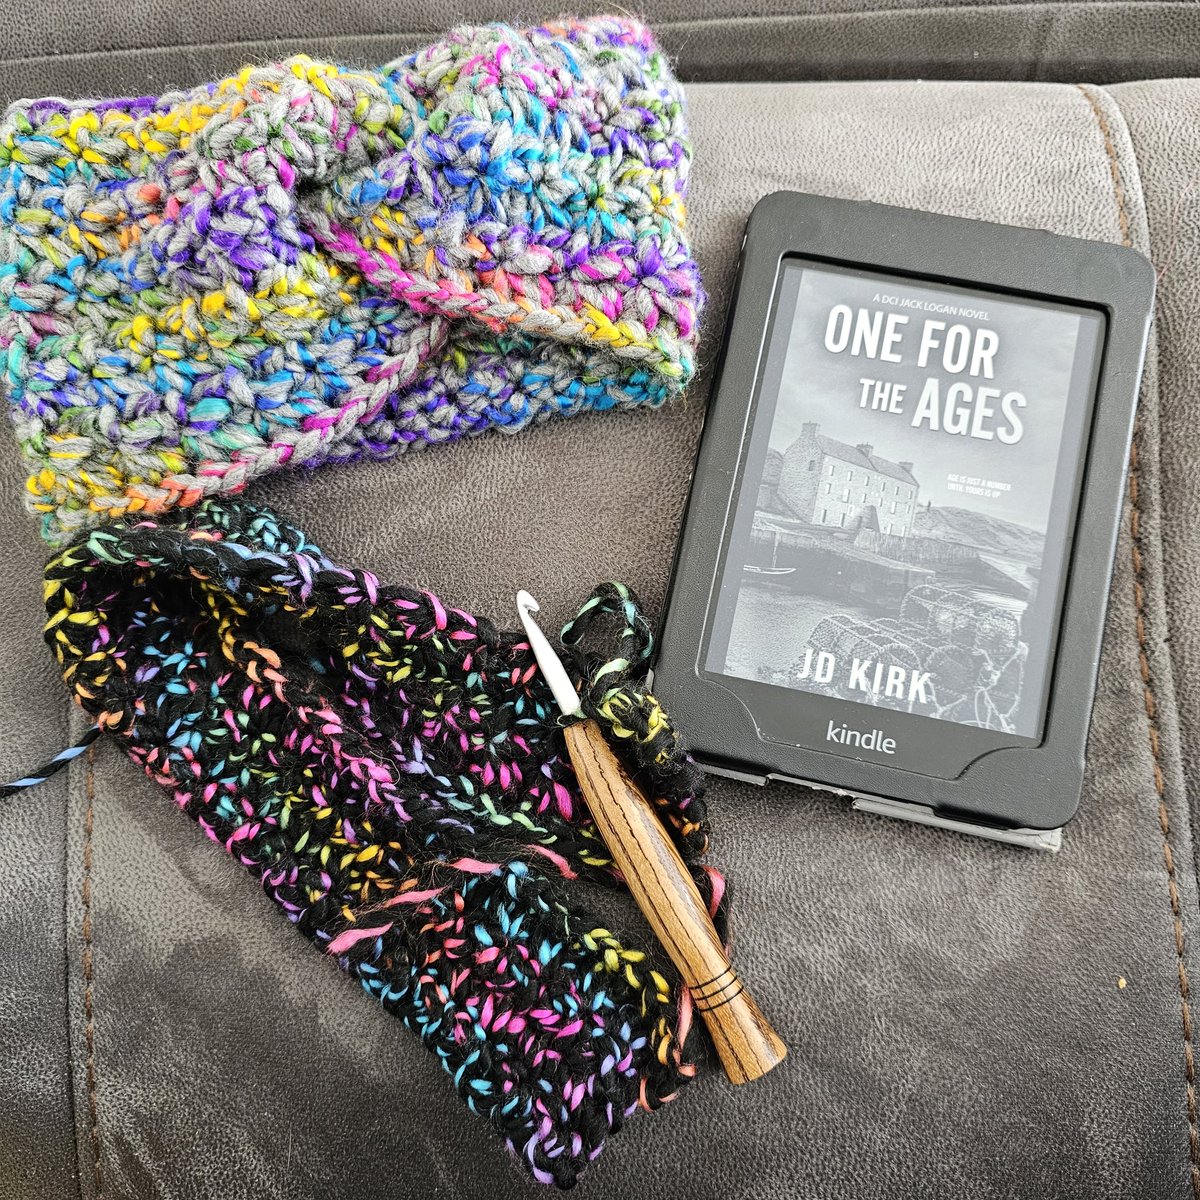 This is the perfect way to ignore my laundry for a little bit this afternoon ... crochet & the latest addition to one of my favorite book series
#crochet #crocheter #bookworm #bookish #crochetlife #yarnlife #readeveryday #handmade #lazyafternoon #dcilogan